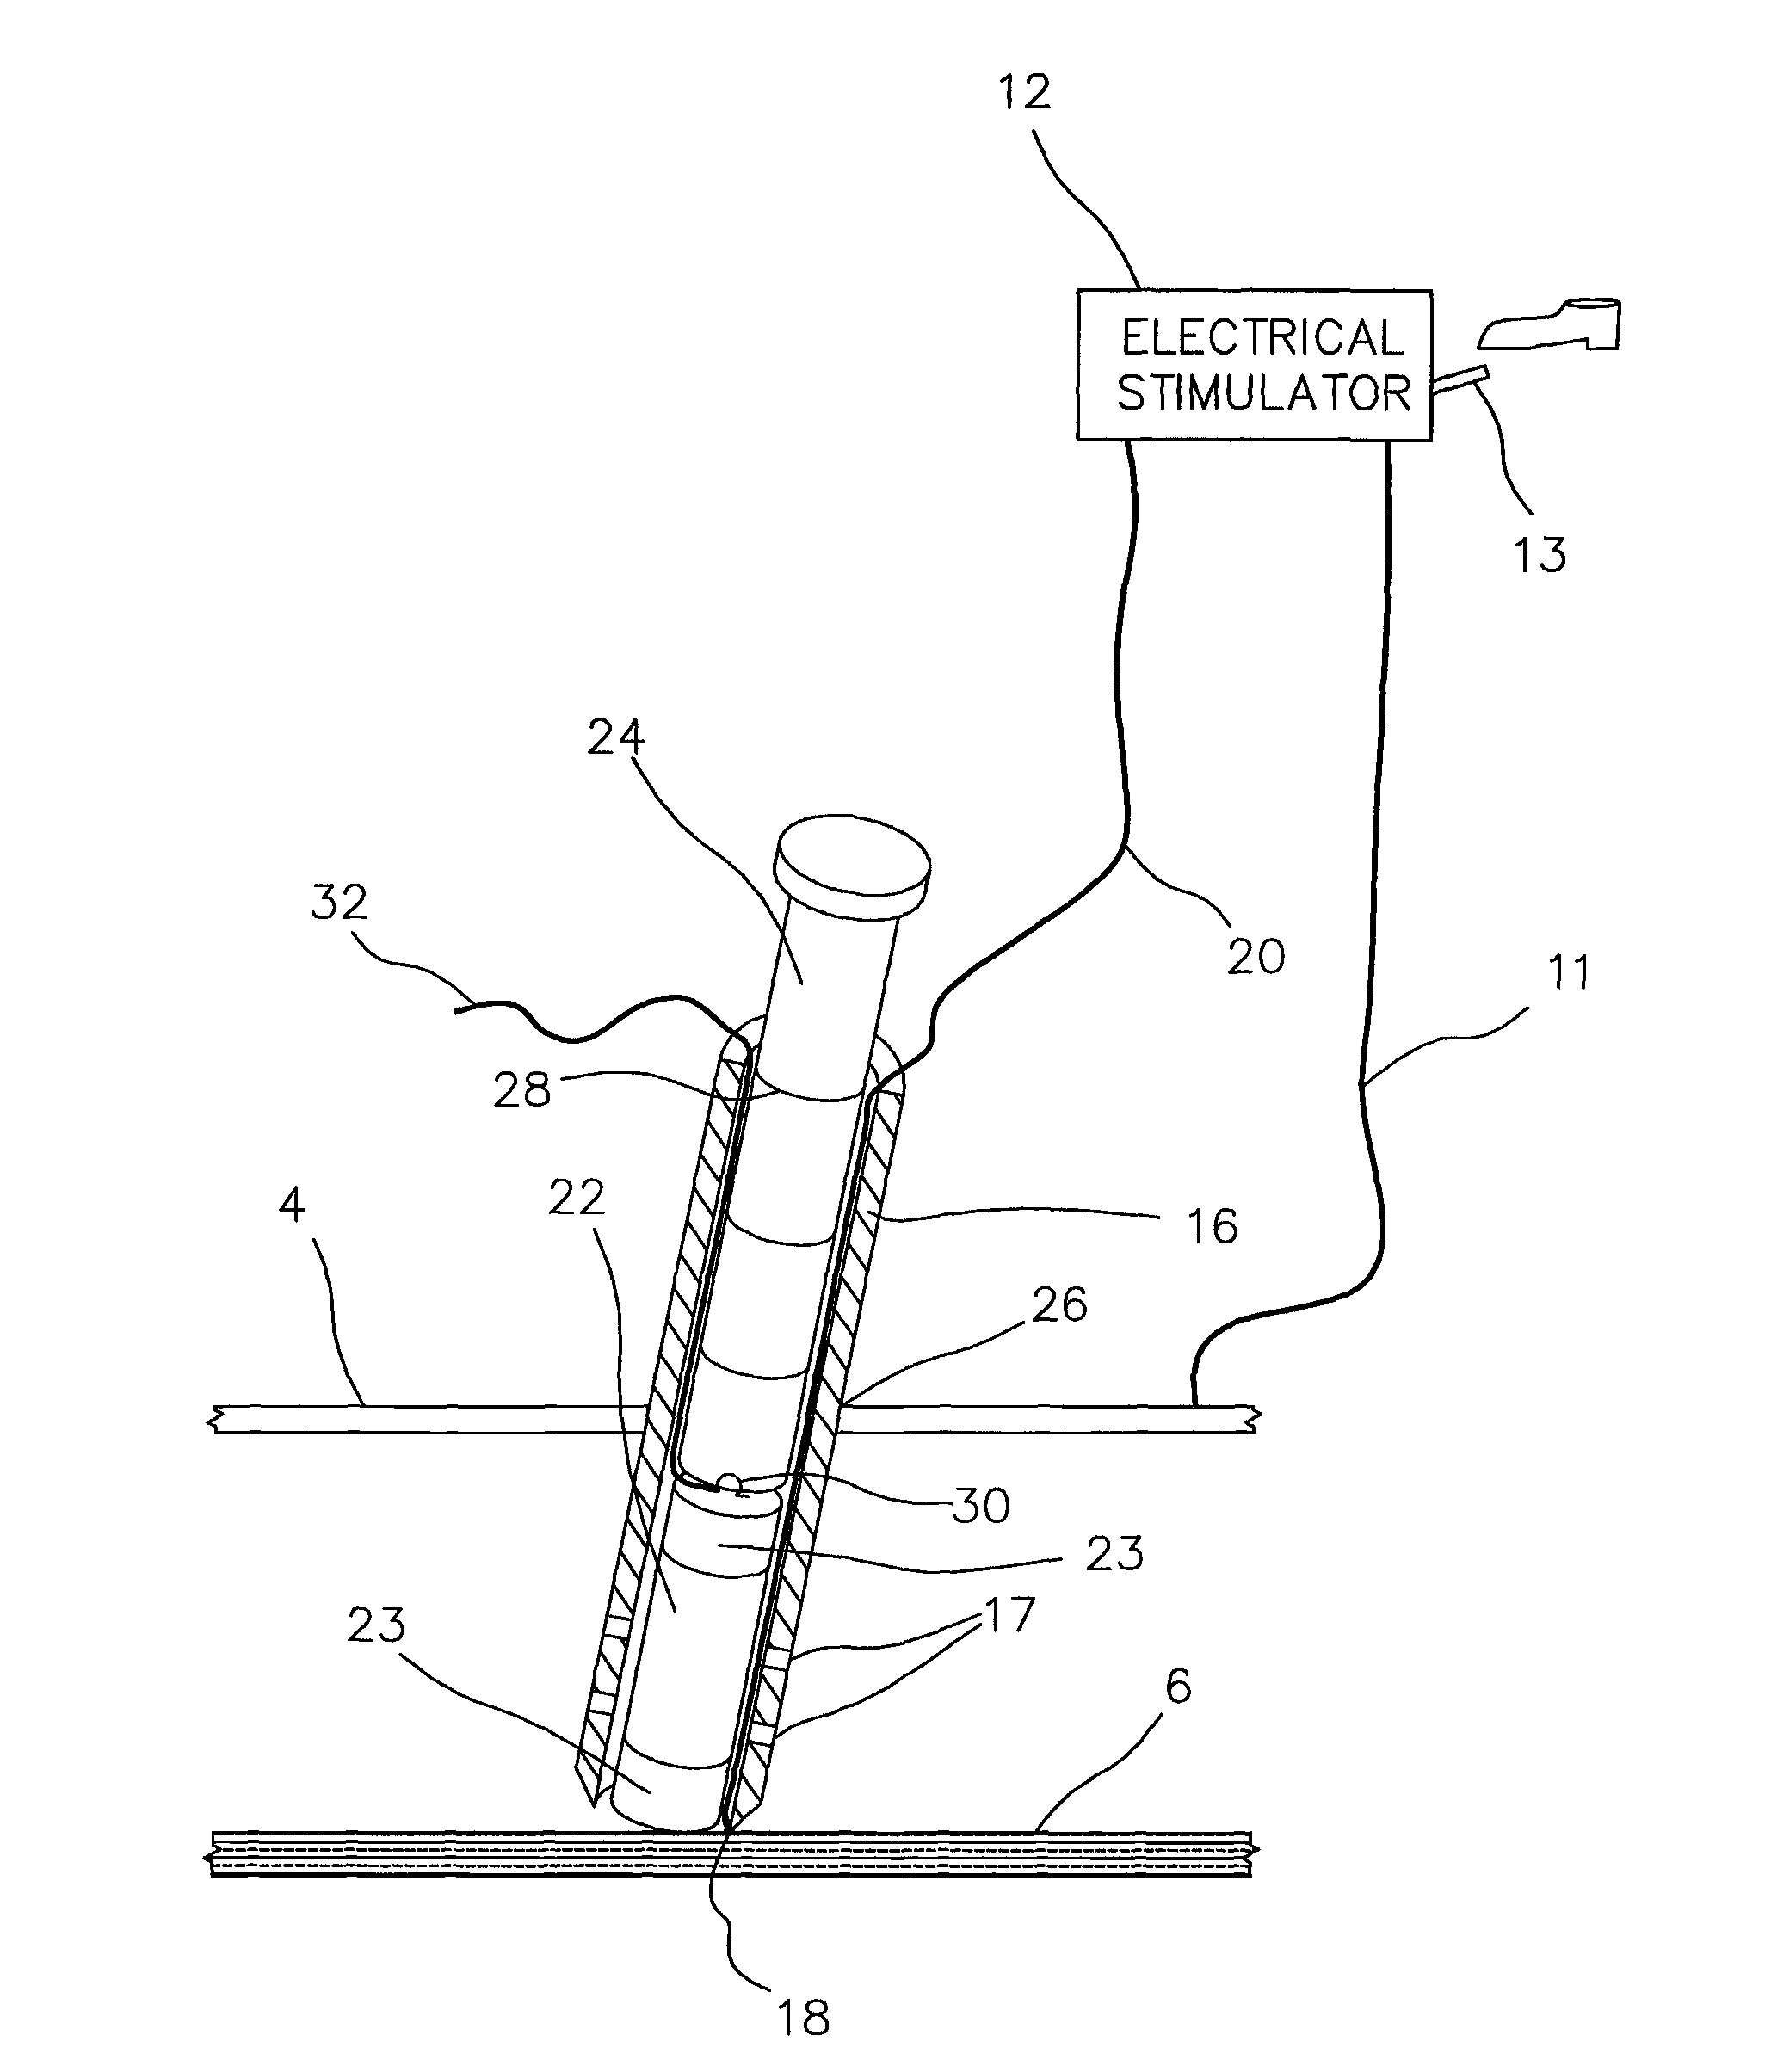 Method for removing surgically implanted devices